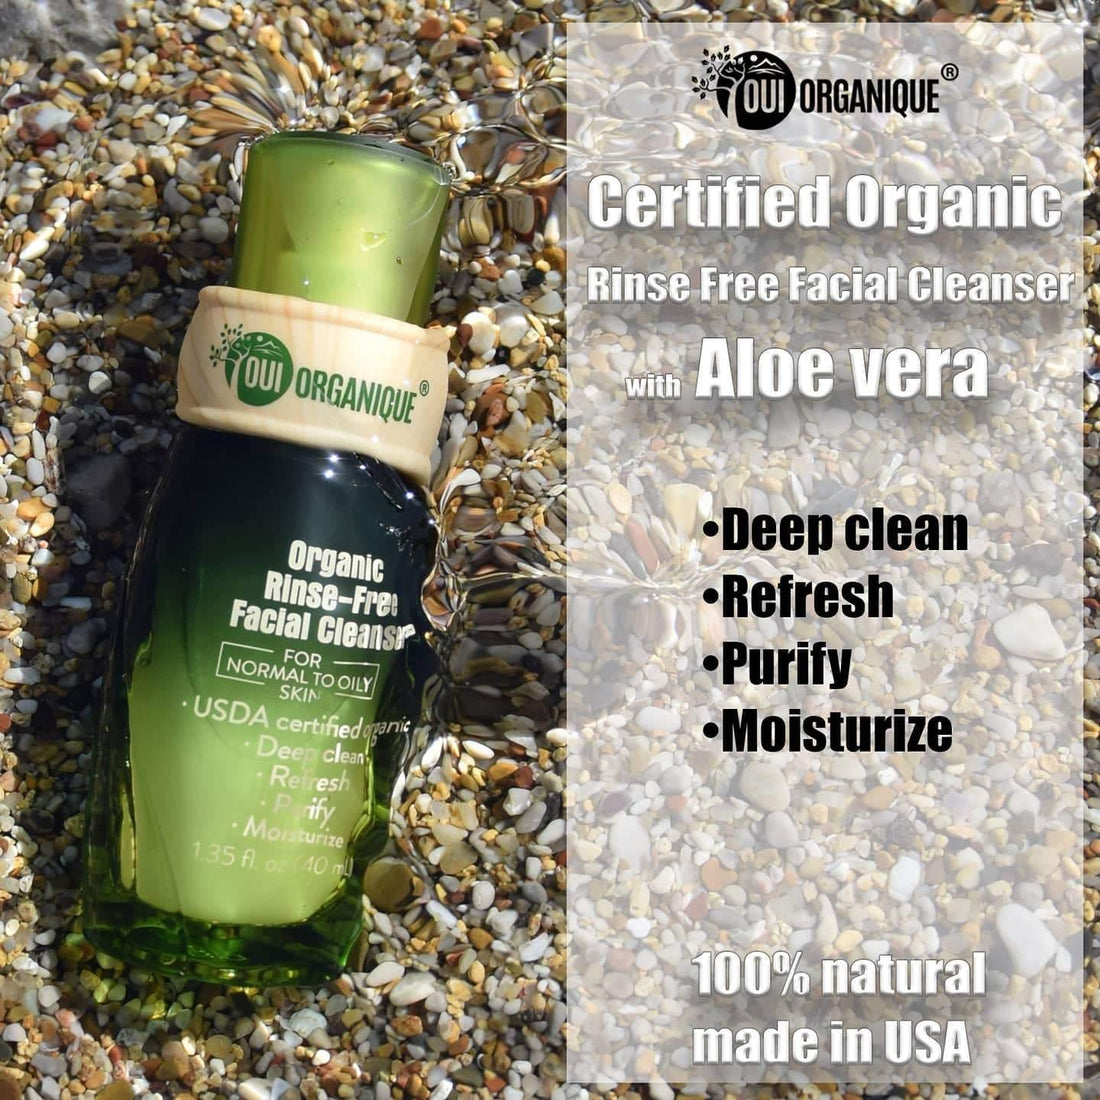 100% natural 🌱

Certified Organic Rinse... - OUI ORGANIQUE